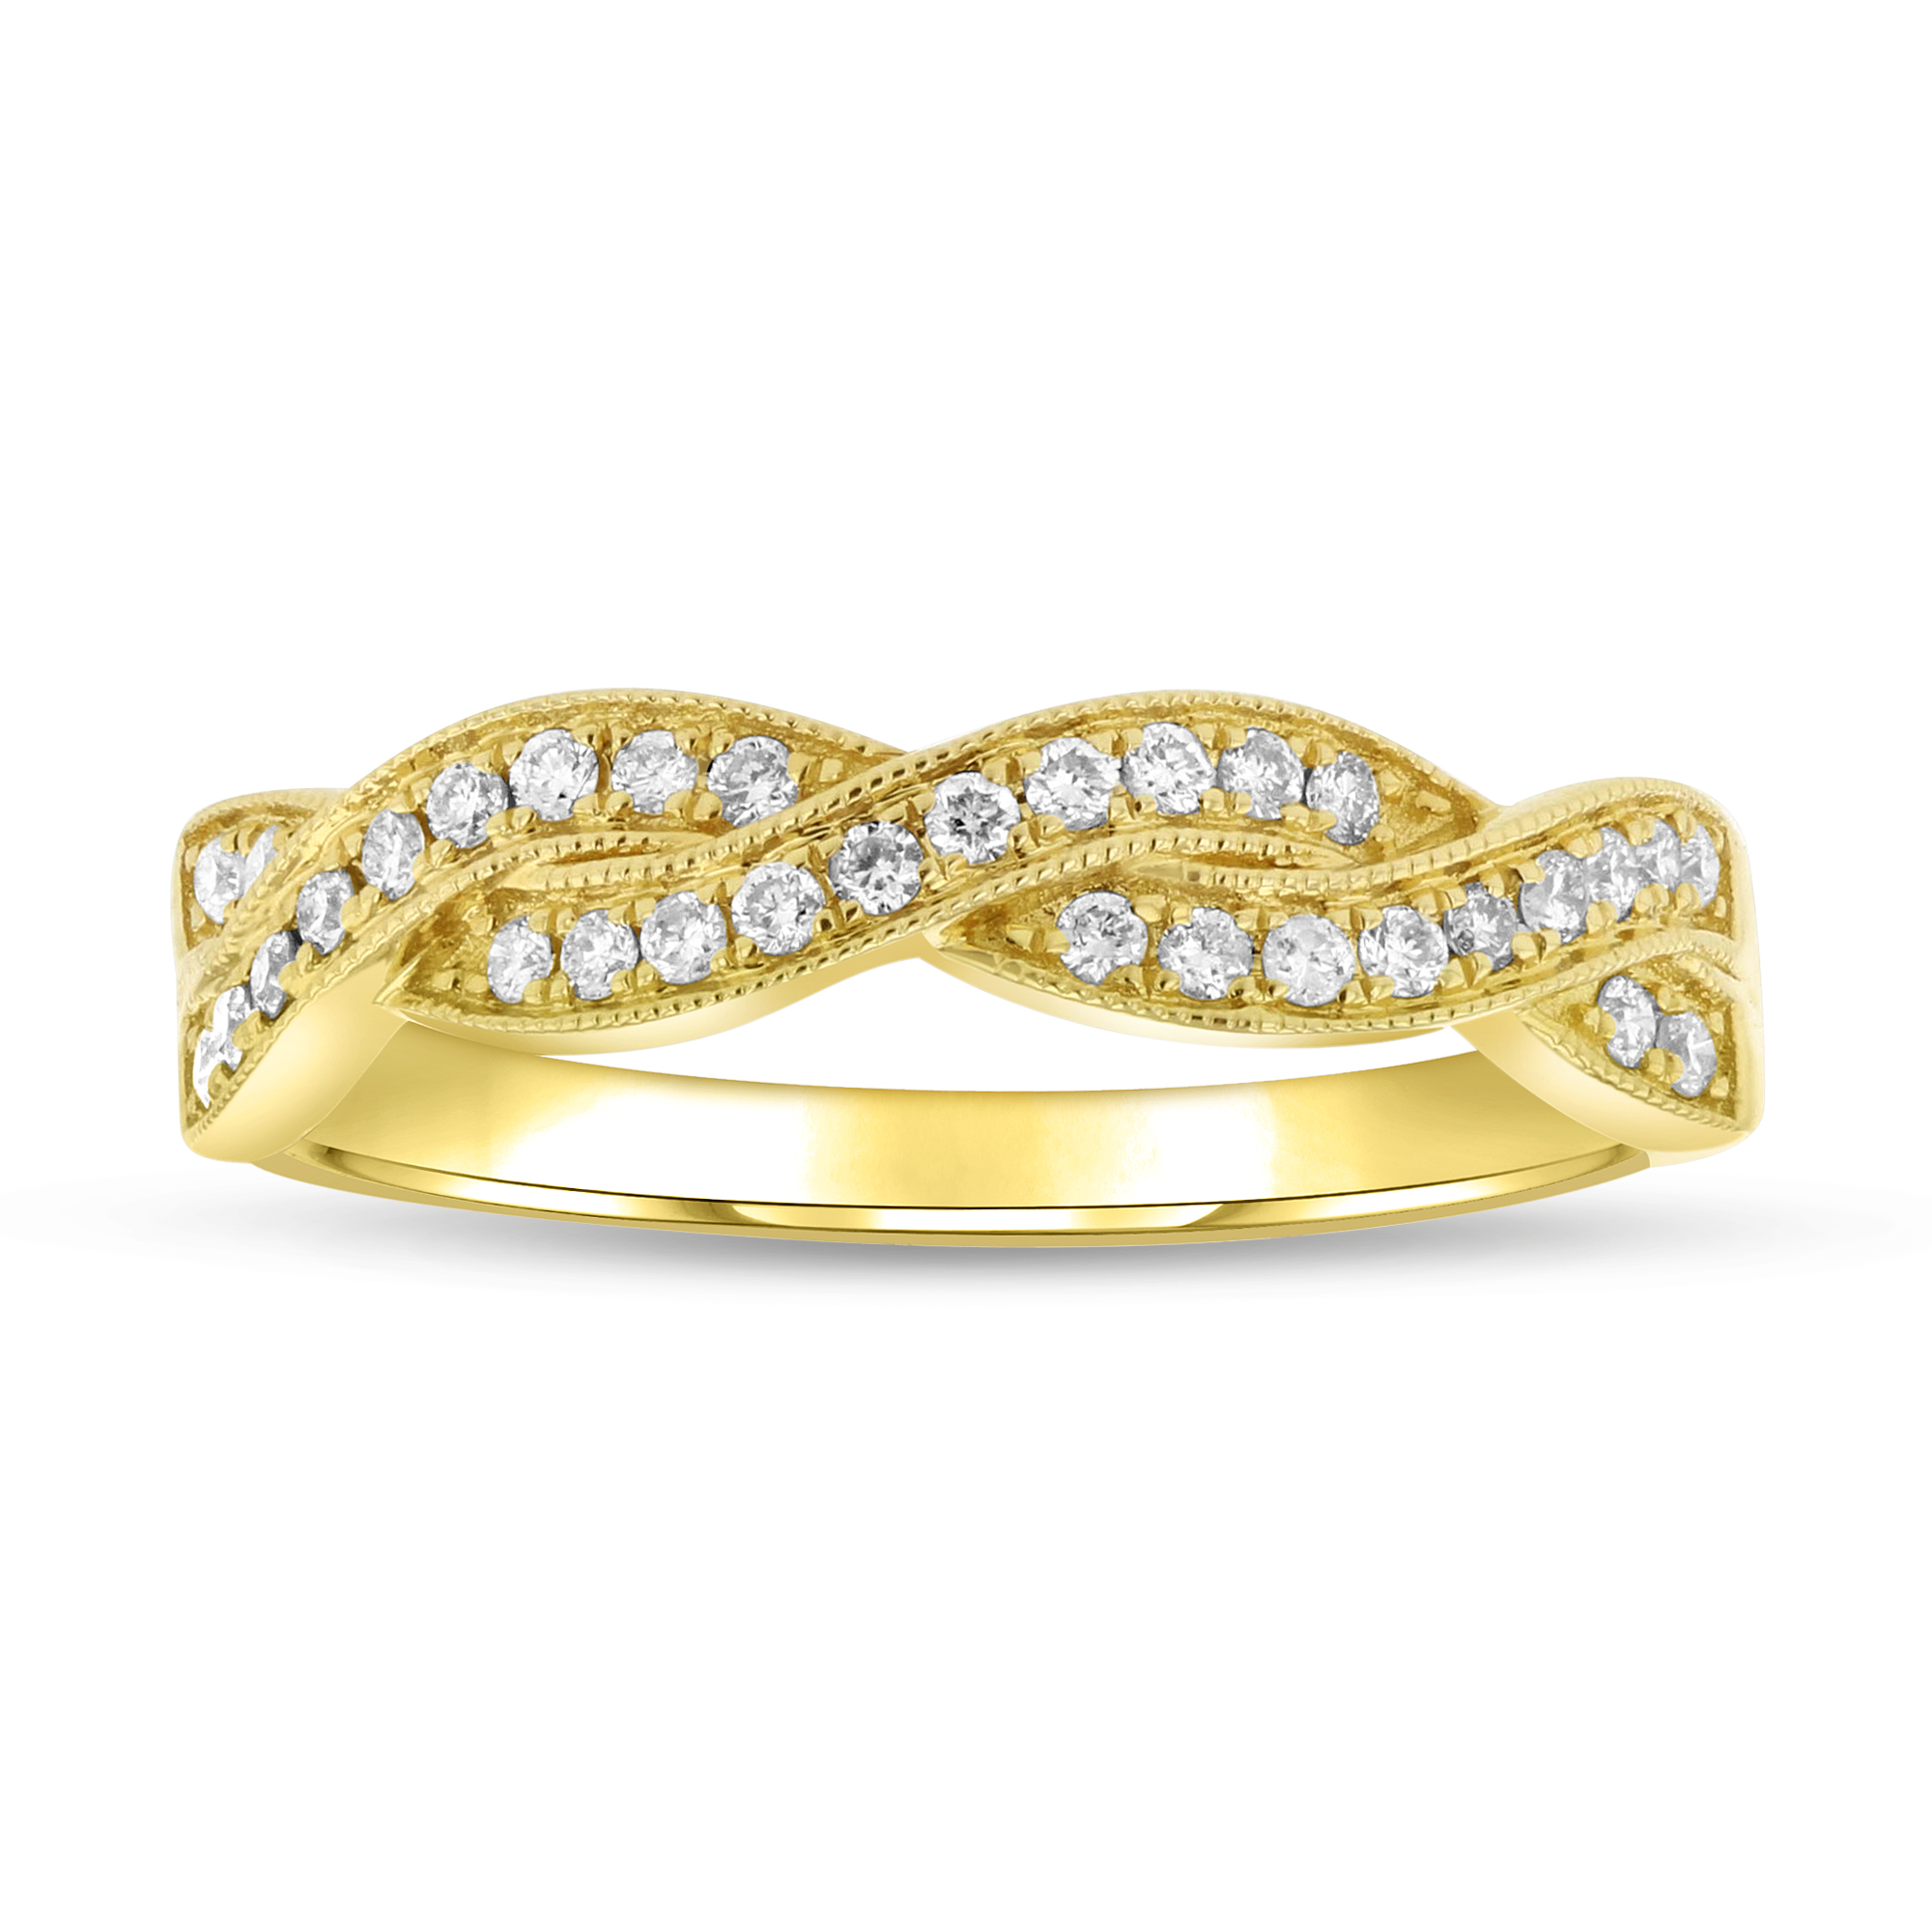 View 0.22ctw Diamond Crossover Band in 14k Yellow Gold